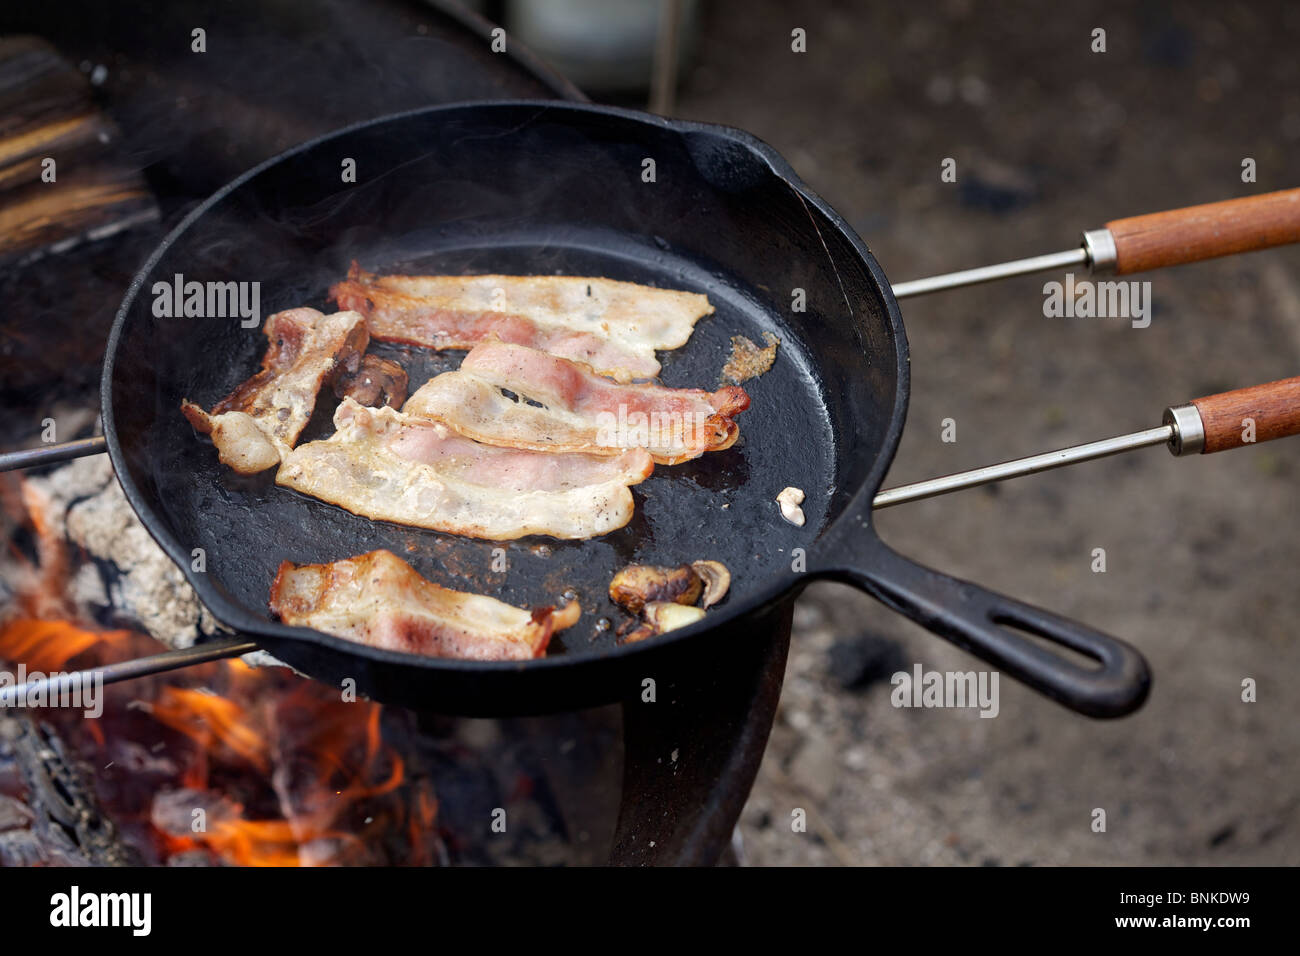 Cooking bacon on campfire Stock Photo